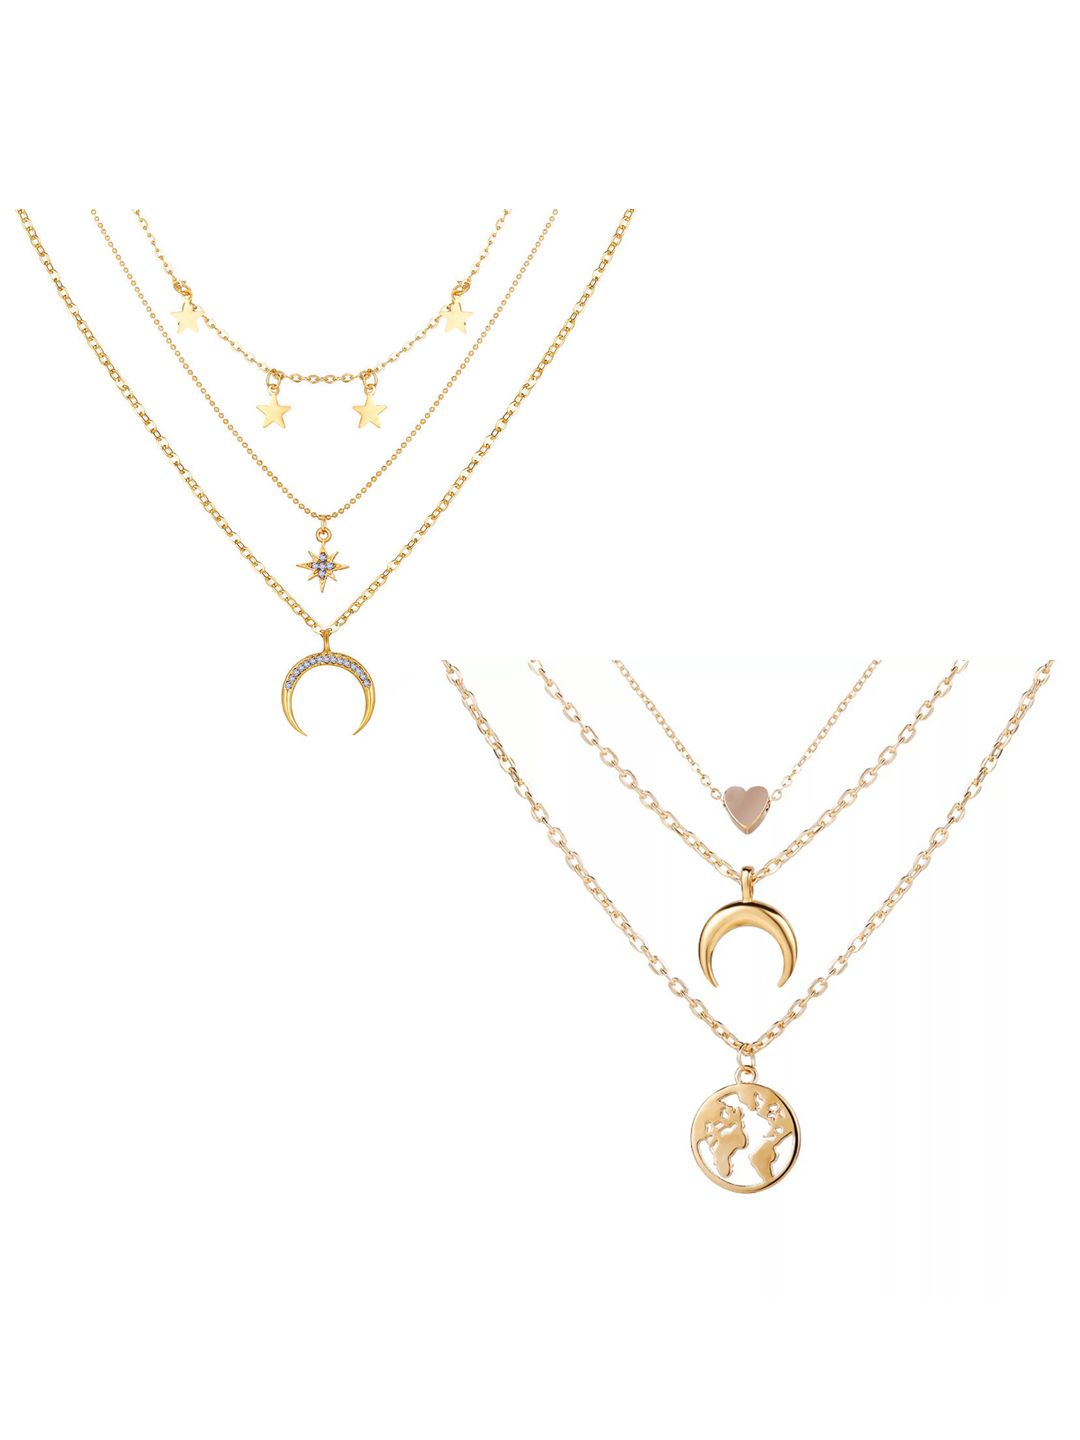 Vembley Set Of 2 Gold-Plated Triple Layered Moon & Earth Pendant Necklace Price in India